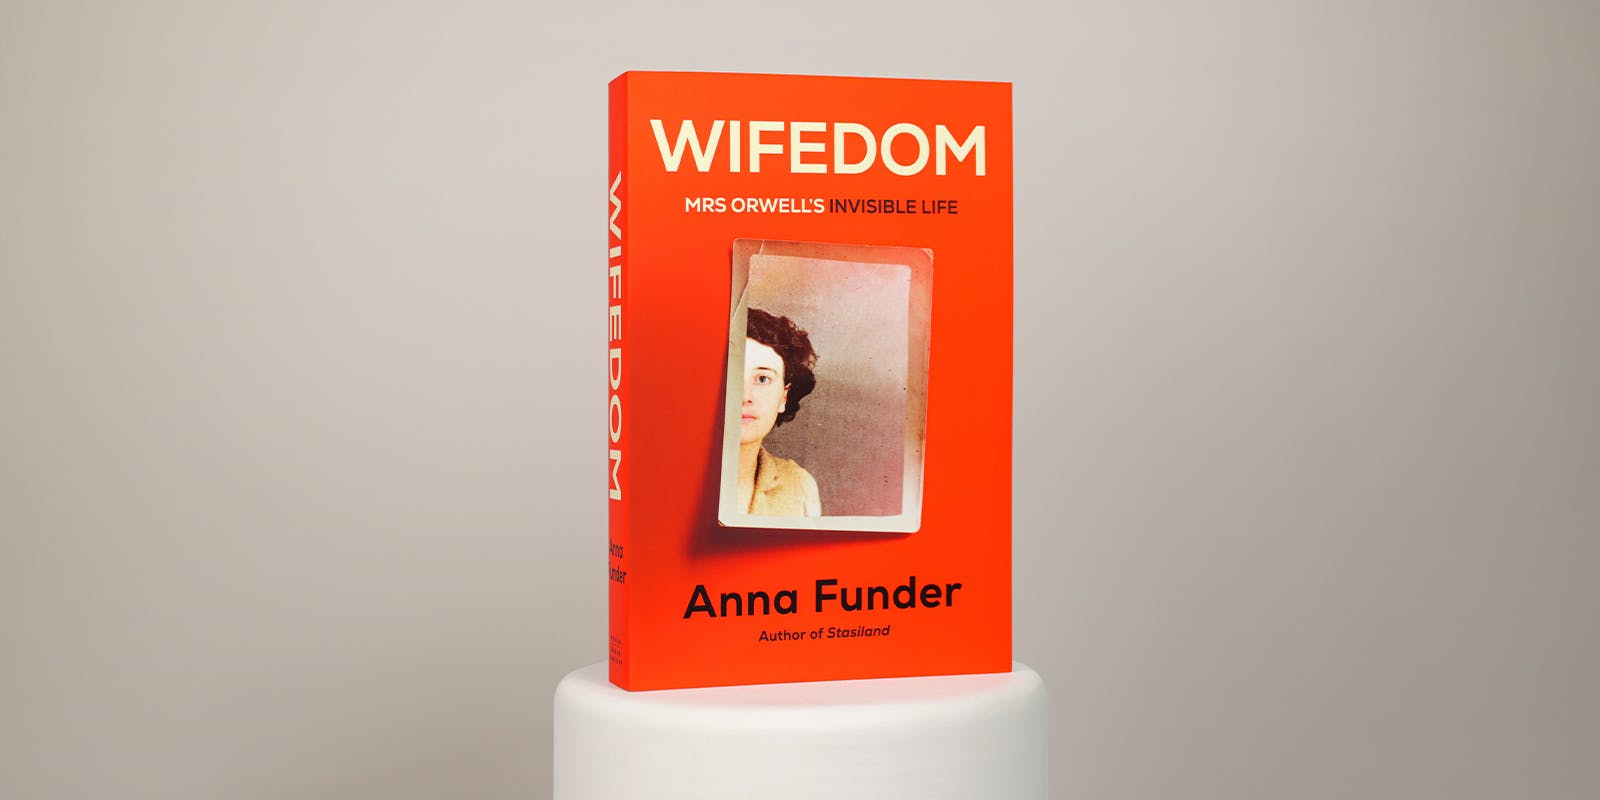 Anna Funder books to read after finishing Wifedom